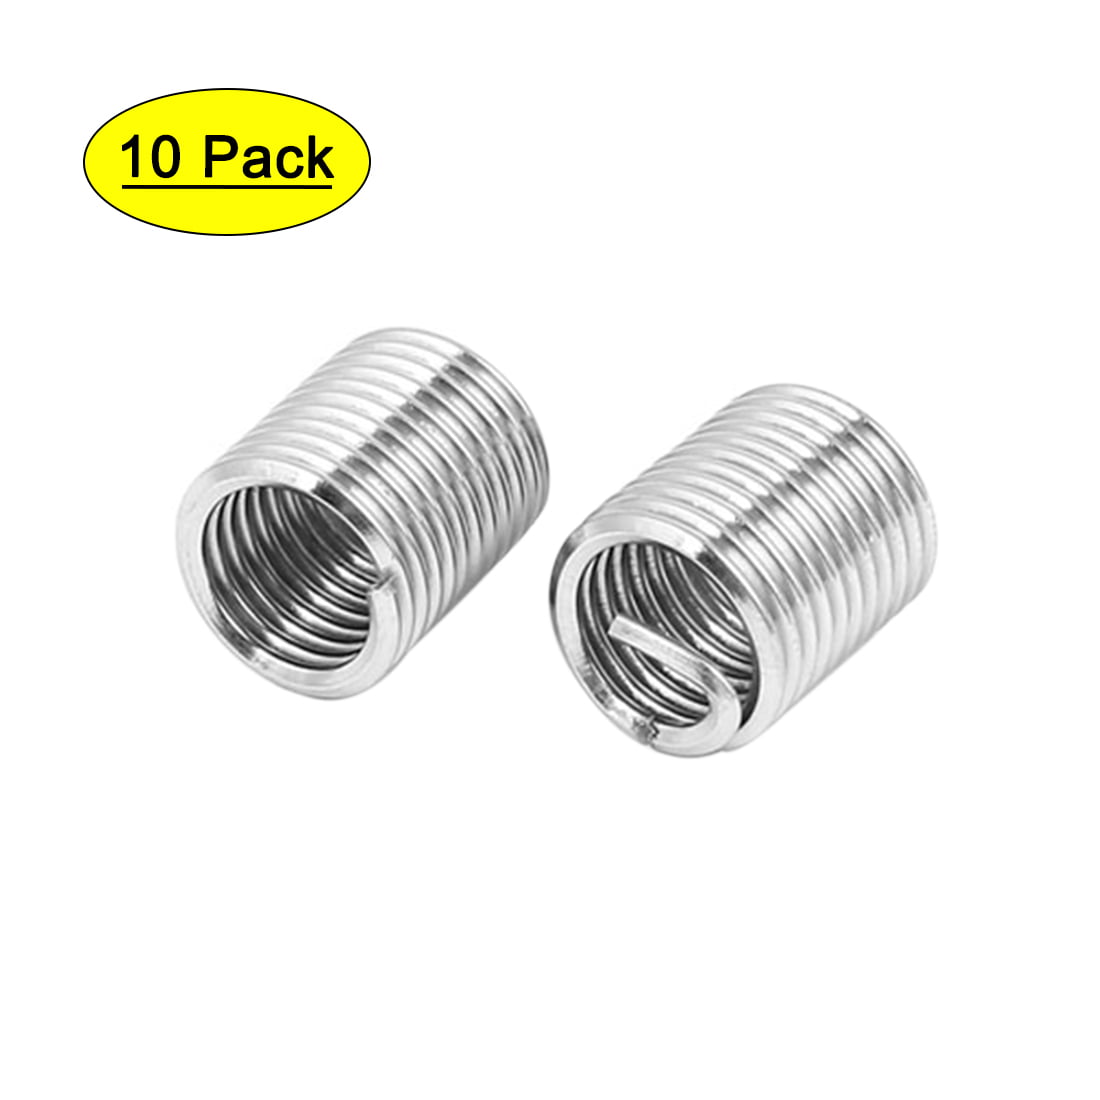 Details about   New 100Pcs Thread Inserts Male Female Reducing Nut Repair Fastener M6x1x2.5 D 